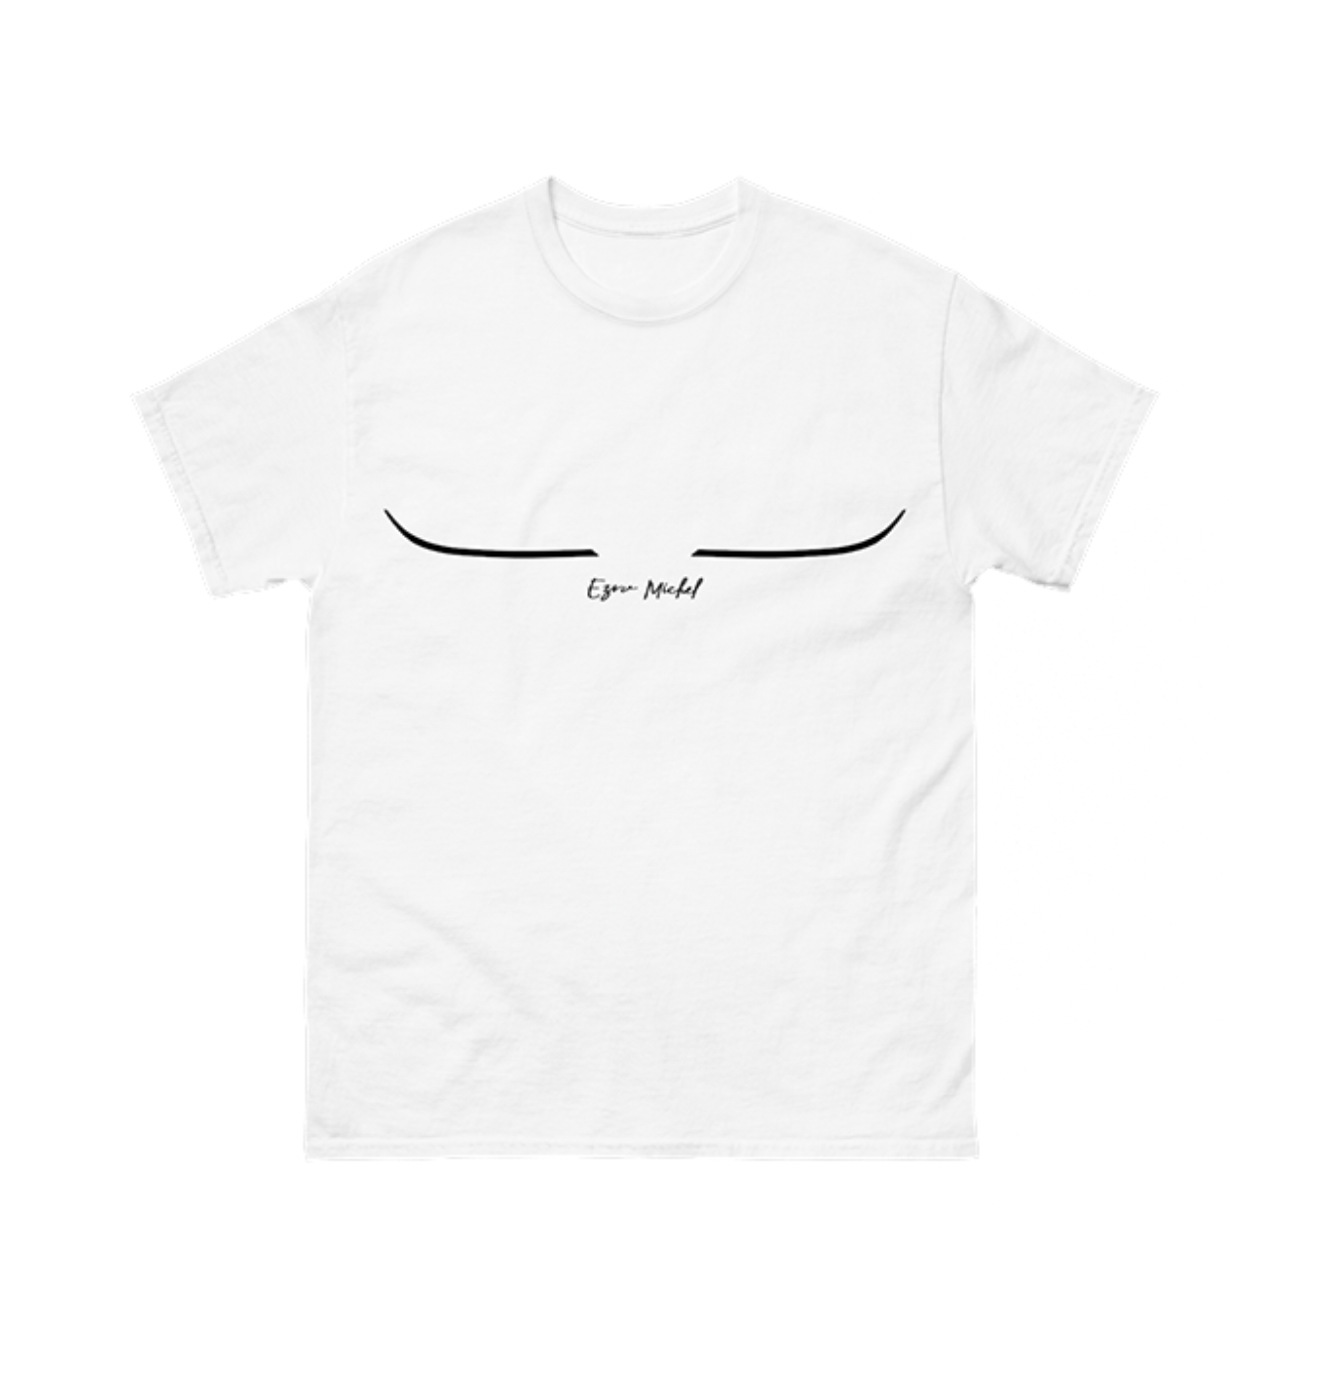 Pussyboy Scars Tee - White - sale